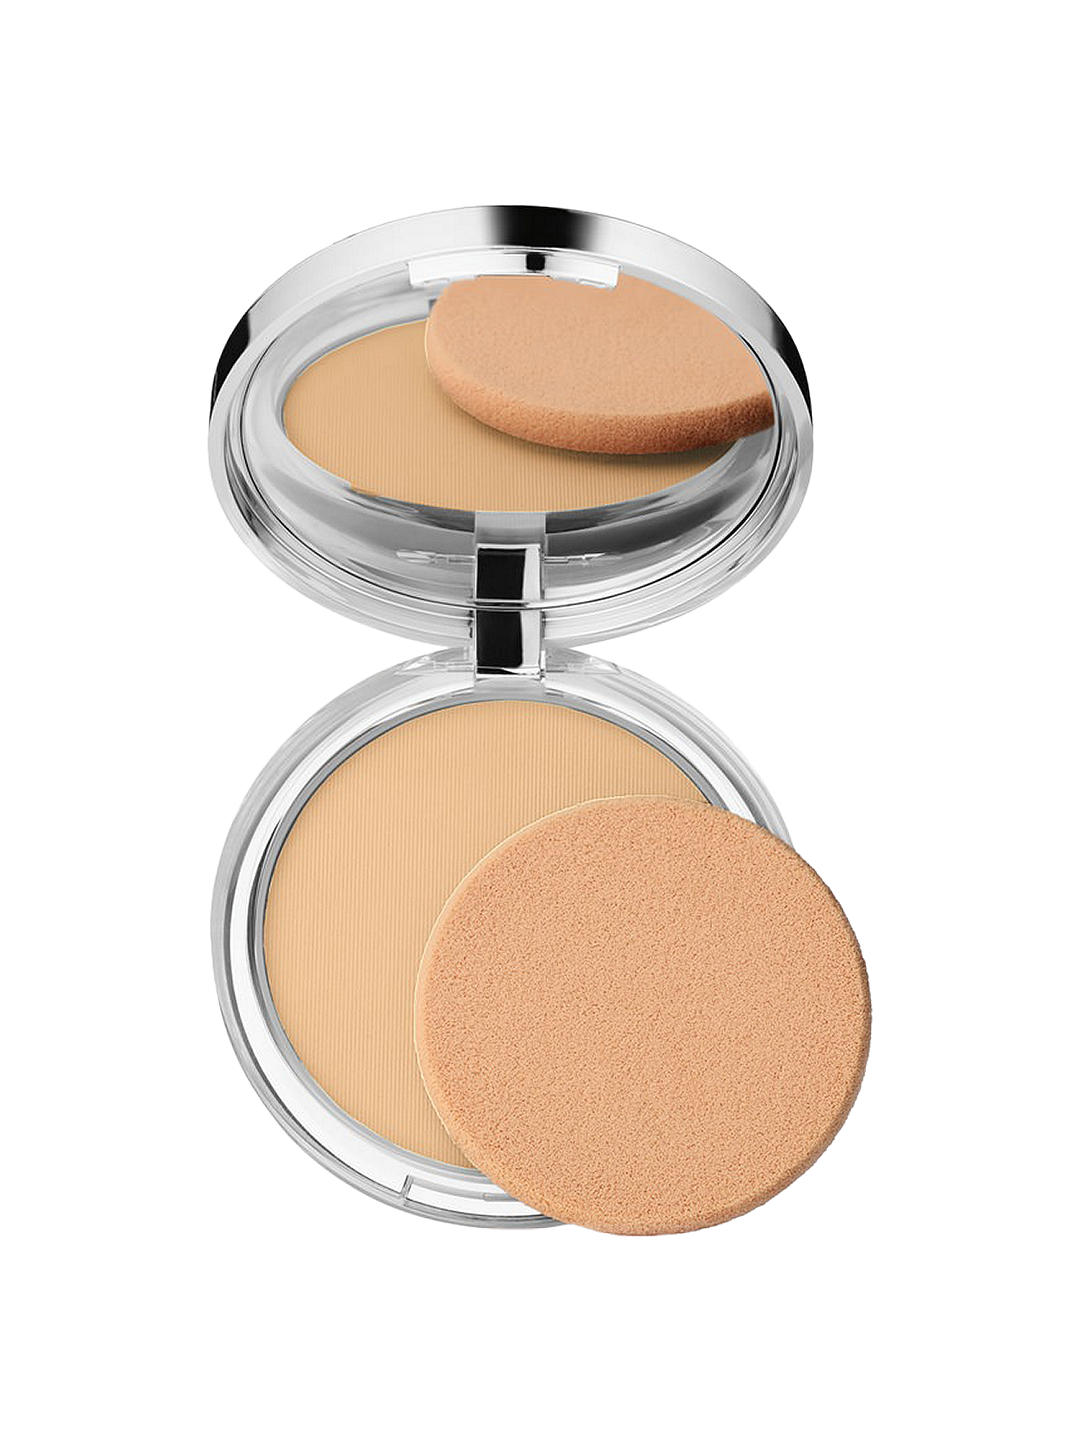 Clinique Stay-Matte Sheer Pressed Powder Oil-Free, Stay Honey Wheat 1